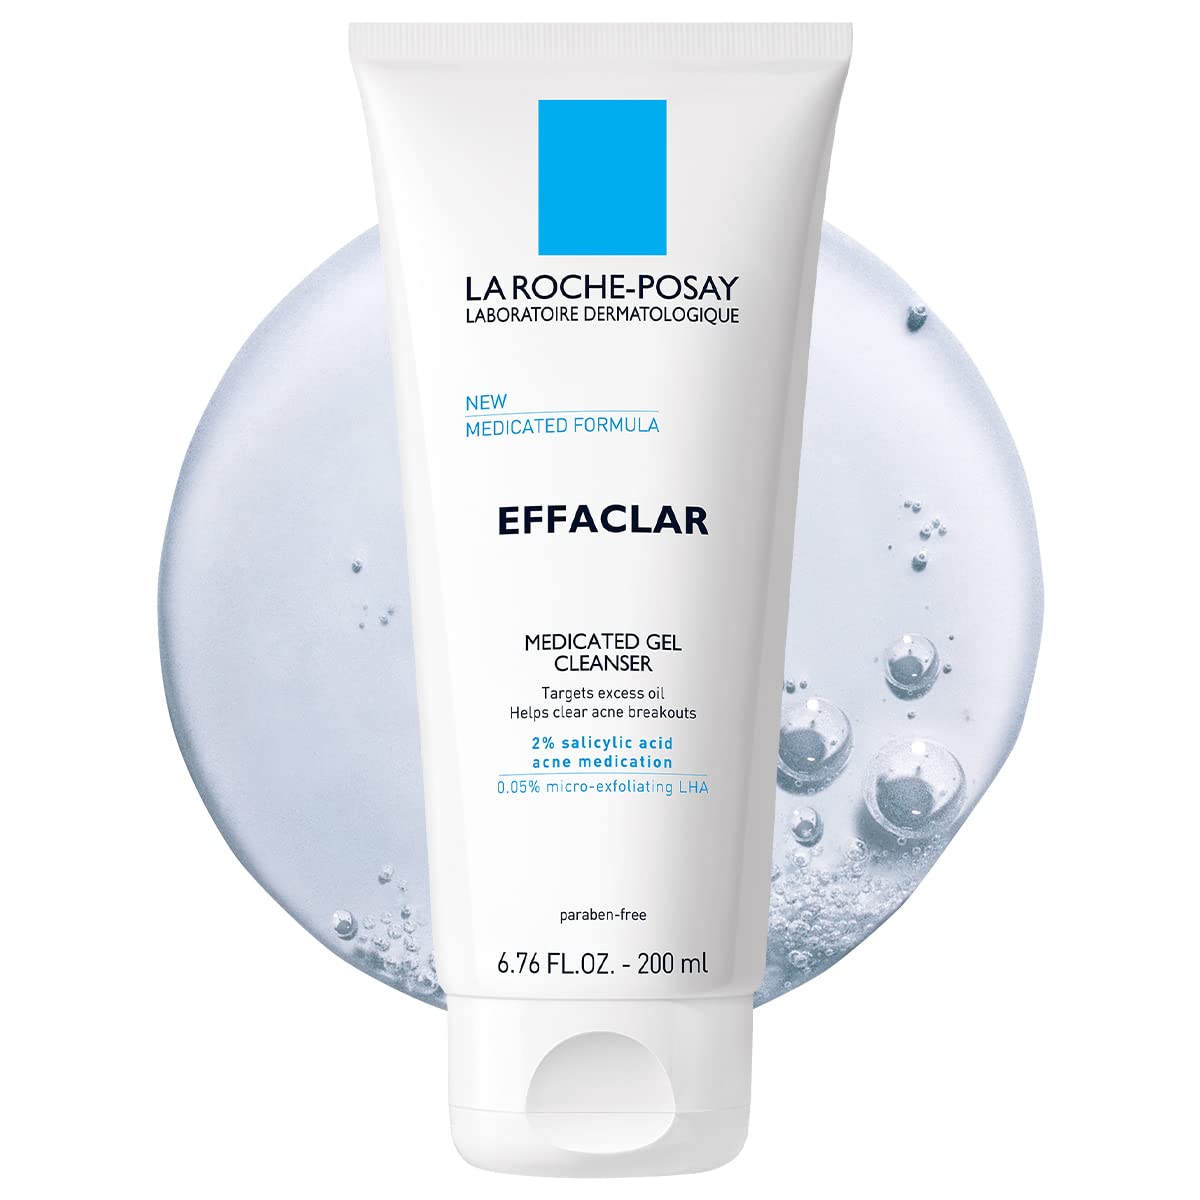 Book Cover La Roche-Posay Effaclar Medicated Gel Facial Cleanser, Foaming Acne Face Wash with Salicylic Acid, Helps Clear Acne Breakouts and with Oily Skin Control, Oil Free, Fragrance Free